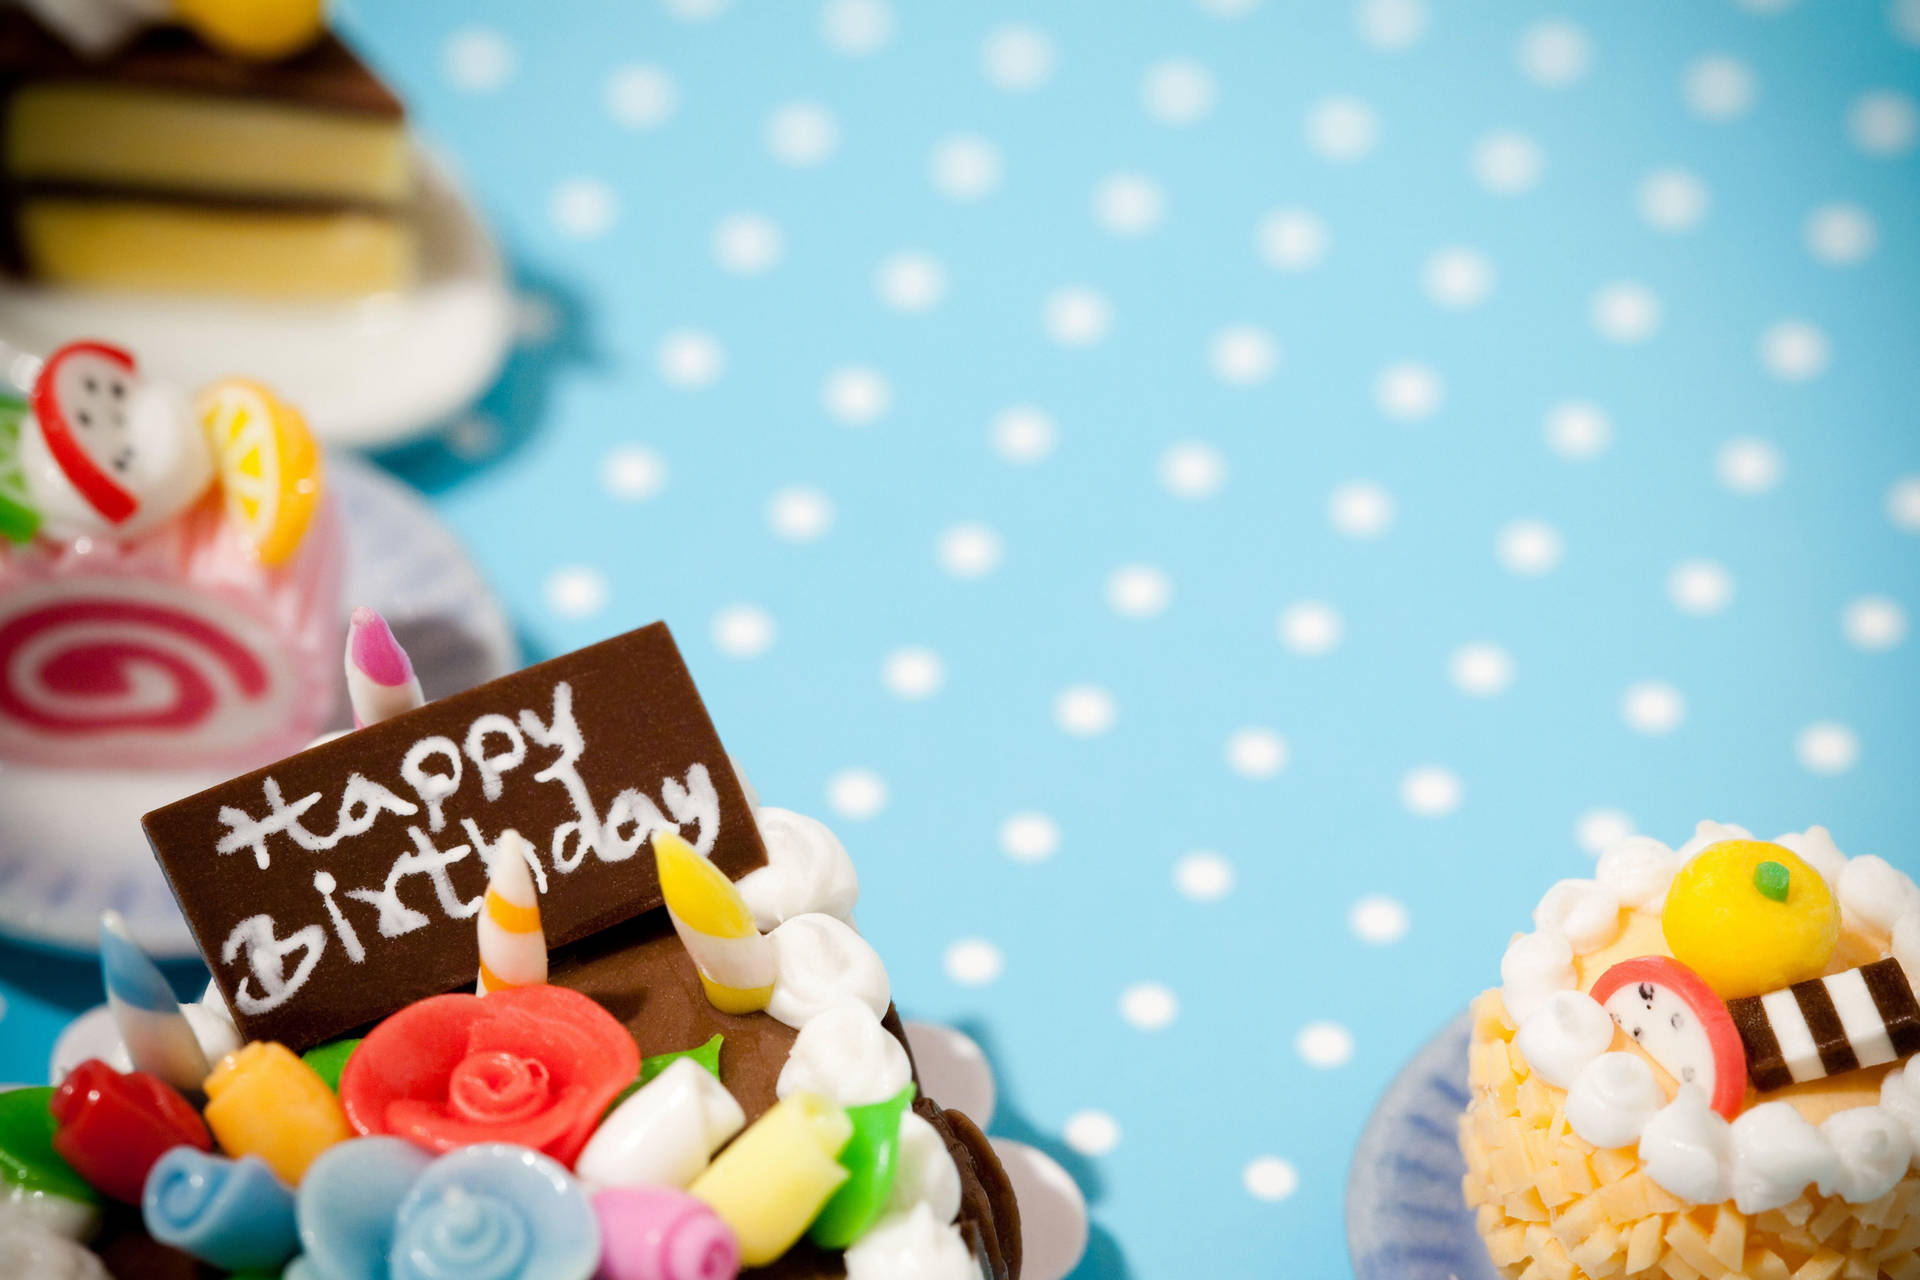 Celebrate with joy and delightful decorated cakes! Wallpaper